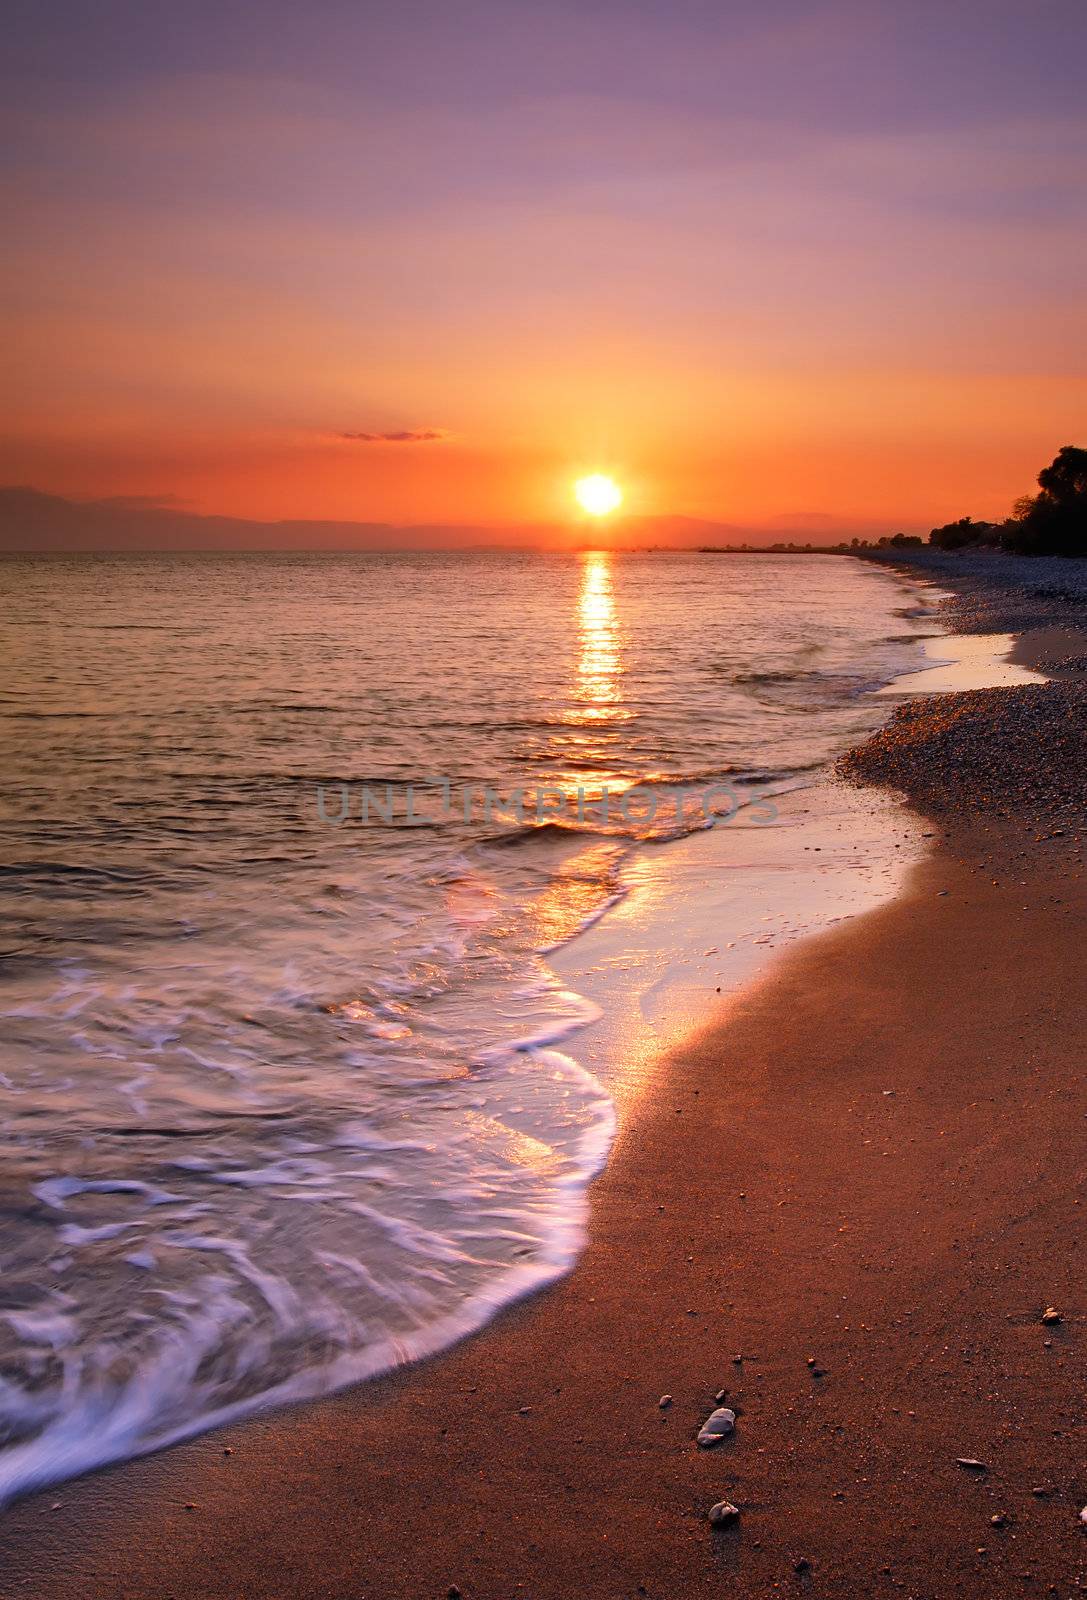 image shows a deserted beach at sunset